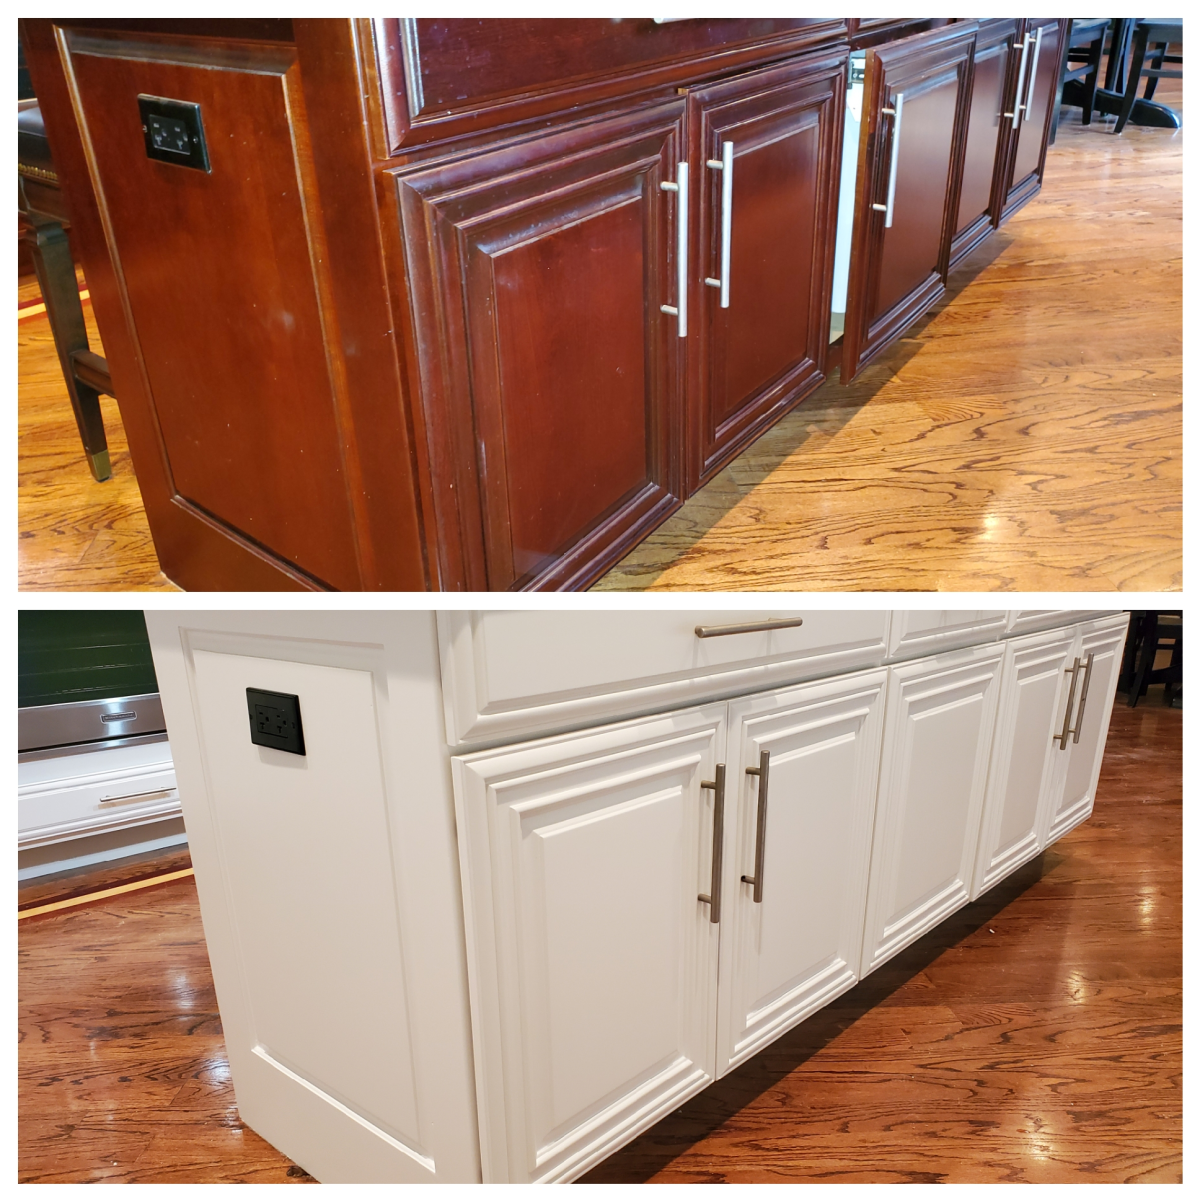 A kitchen island I spray painted with enamel.